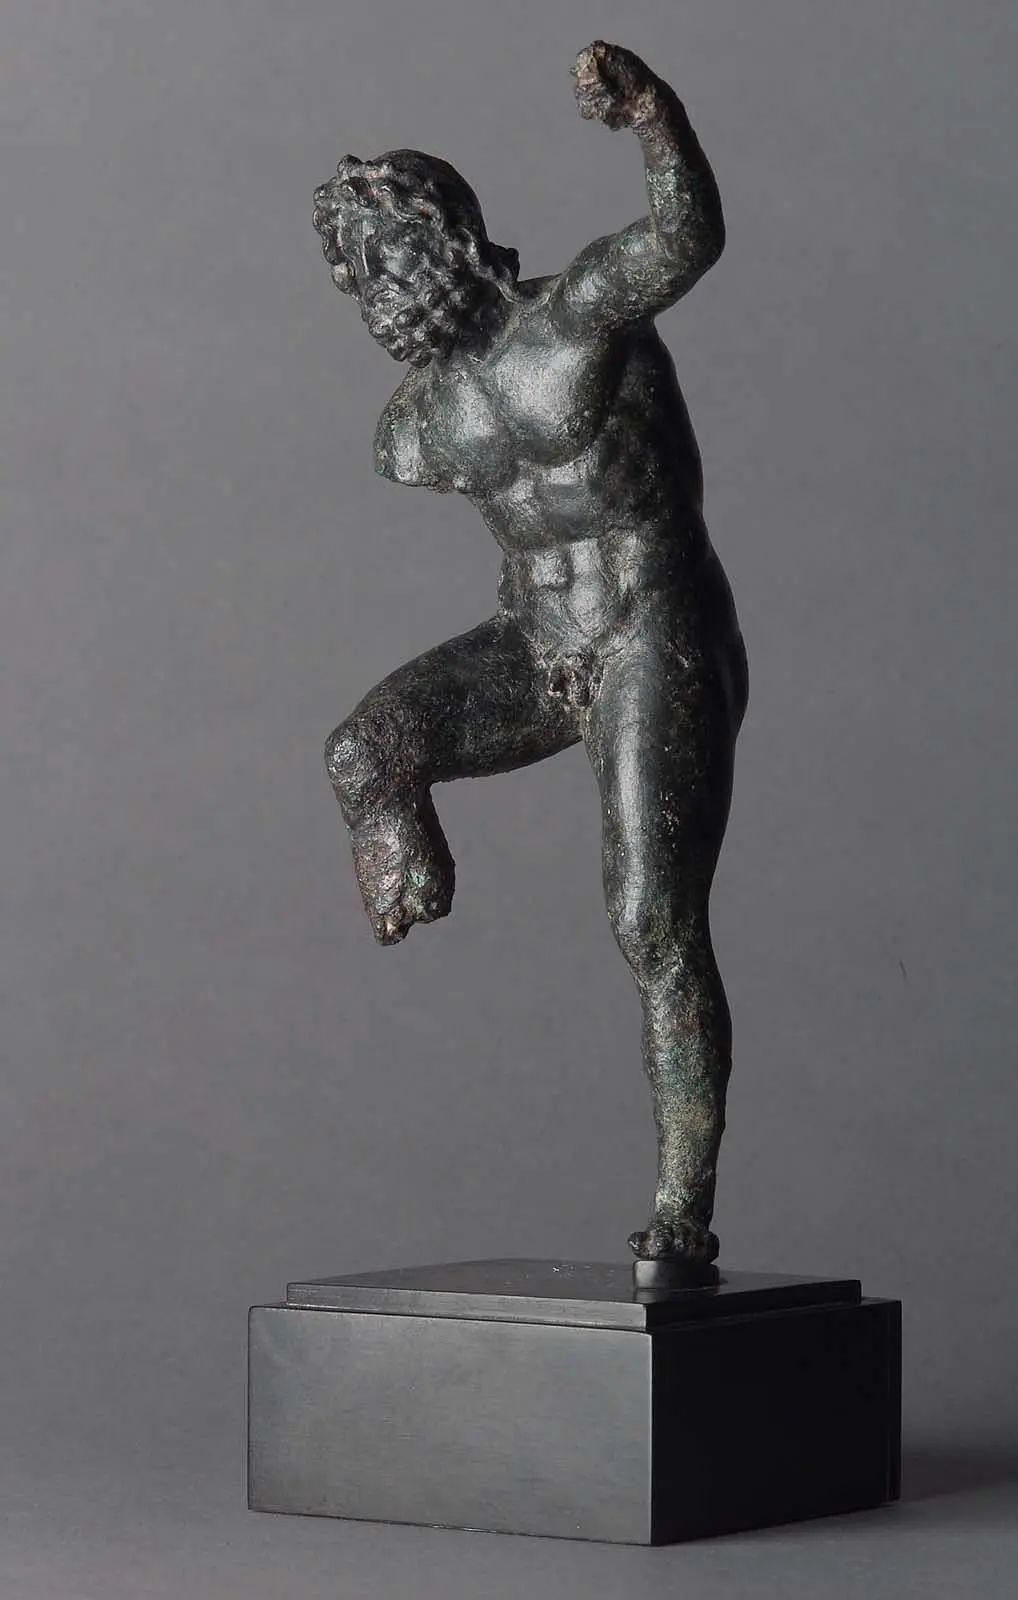 Poseidon, Greek or Roman, Late Hellenistic or Imperial Period, about 100 B.C.–A.D. 180, Bronze